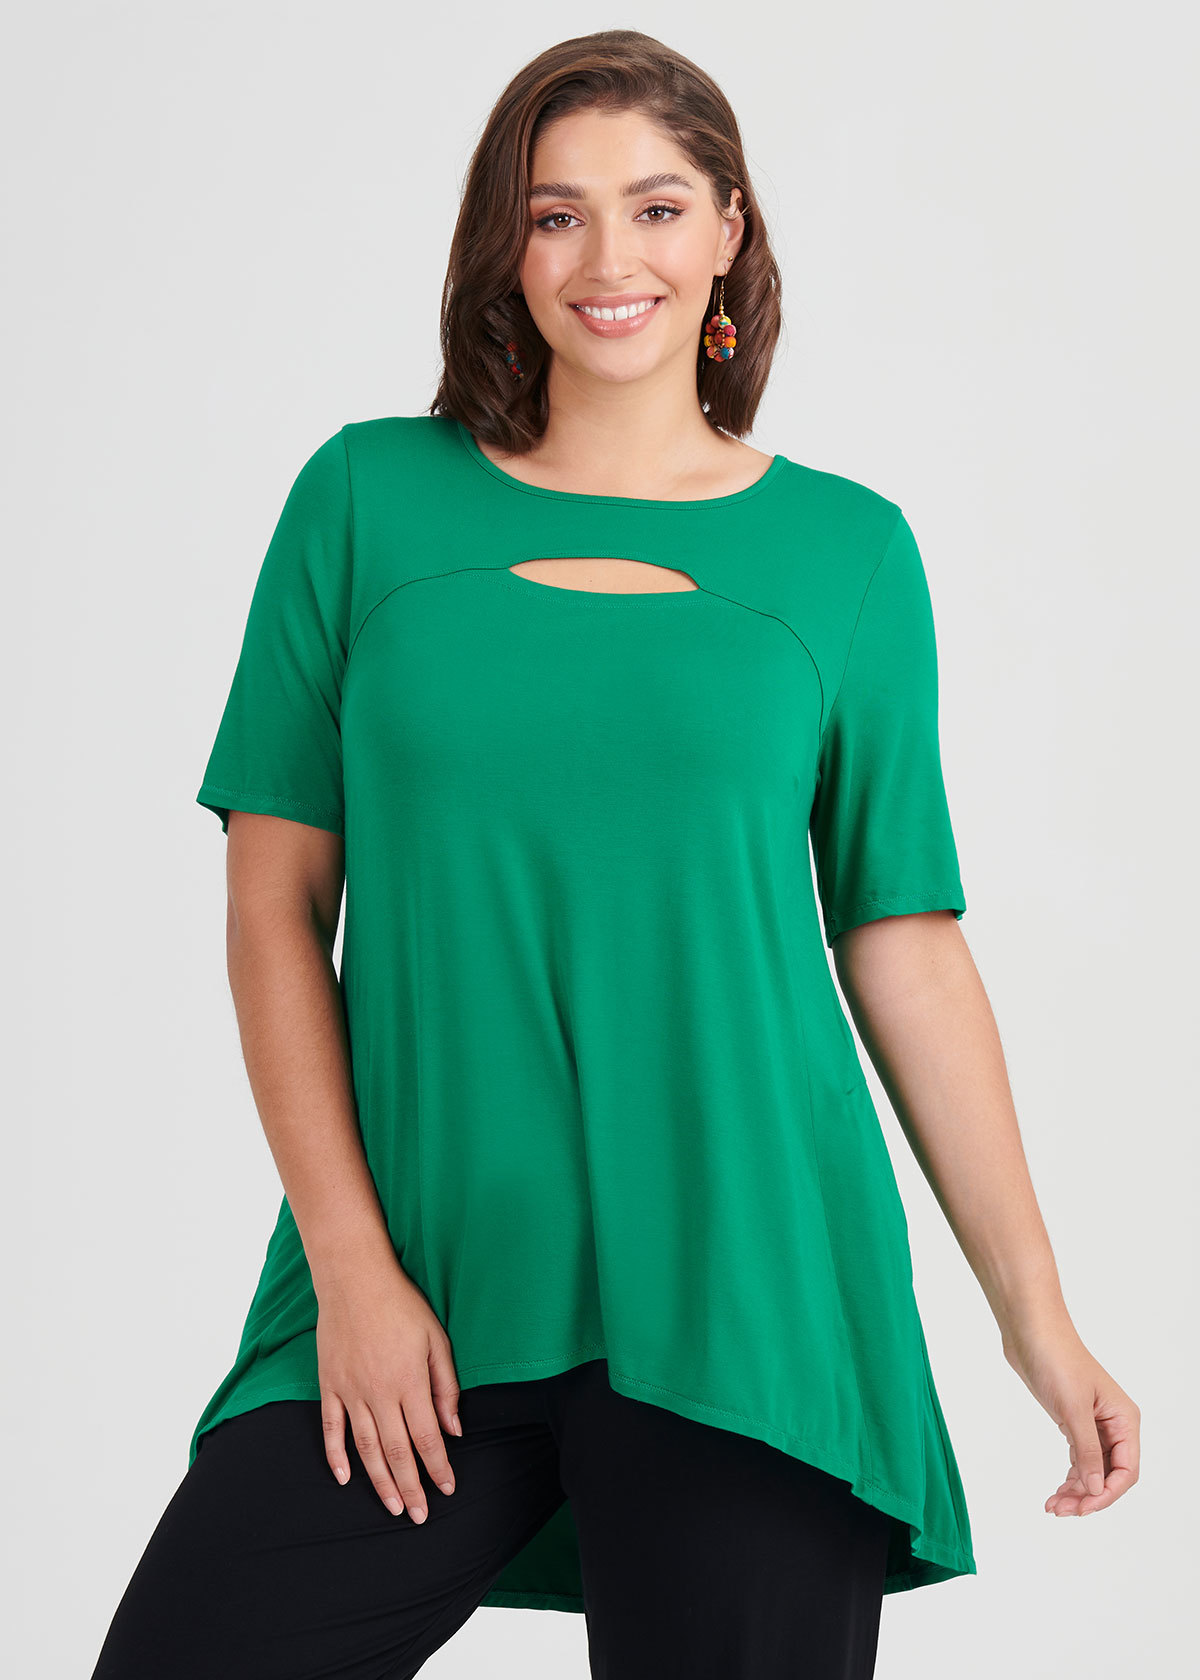 Shop Moda Bamboo Top in Green in sizes 12 to 24 | Taking Shape